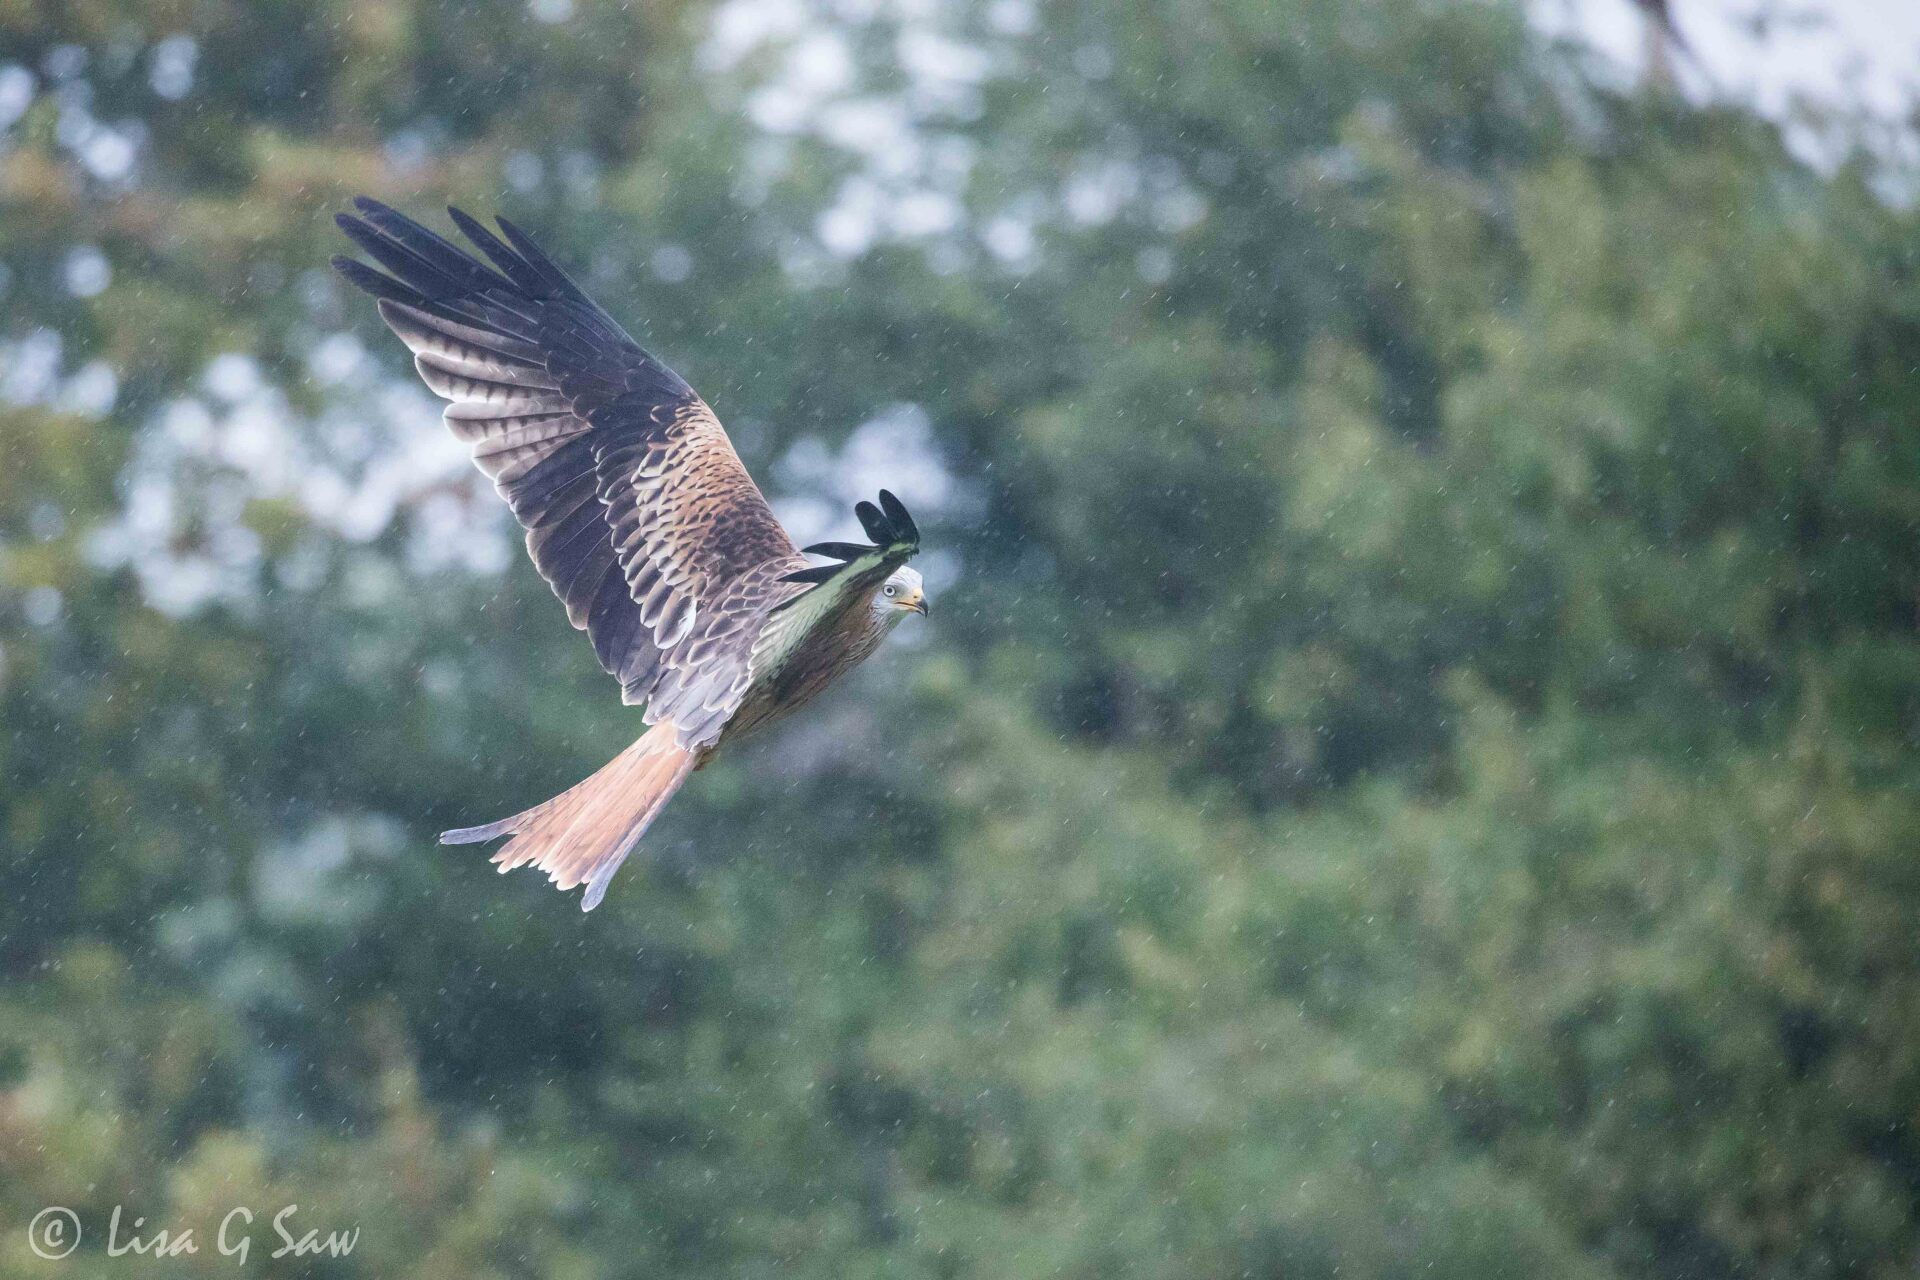 Red Kite flying in the rain at Rhayader